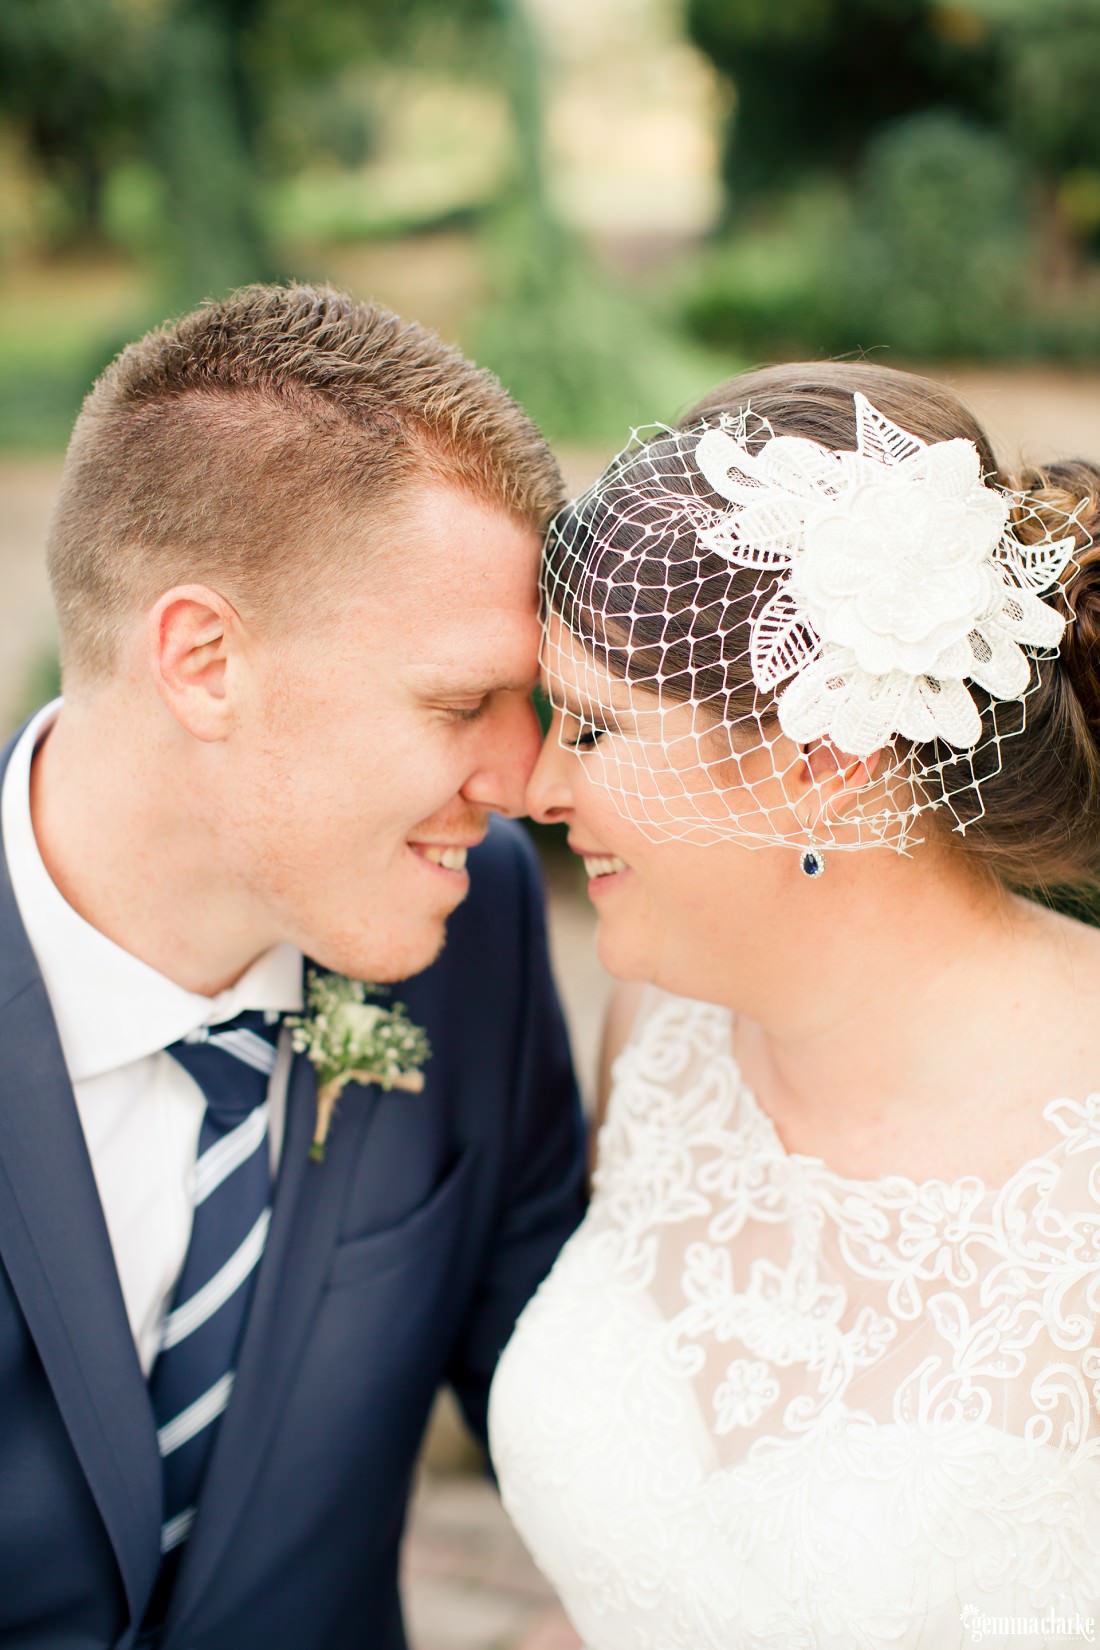 An intimate moment between a bride and groom with their foreheads and noses pressed together - Camden Wedding